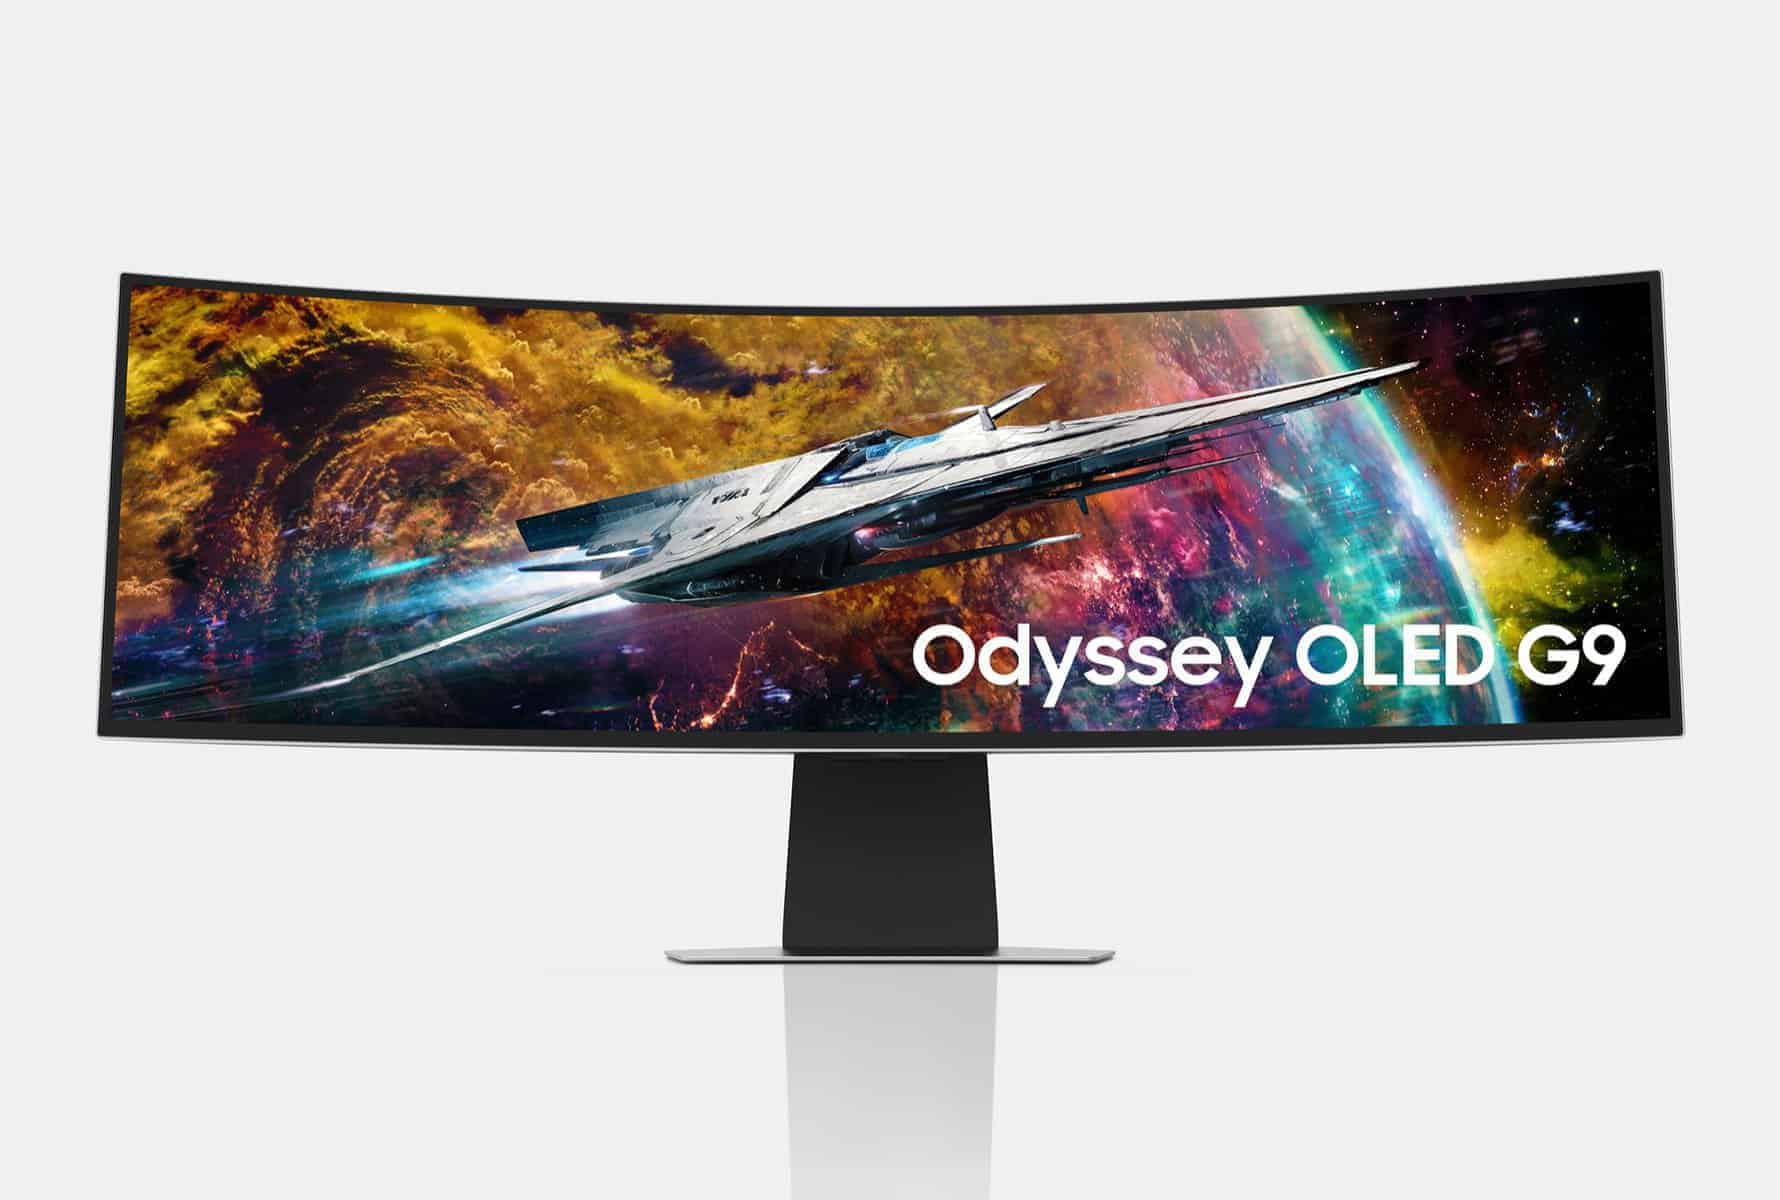 How bright is the Samsung Odyssey OLED G9?